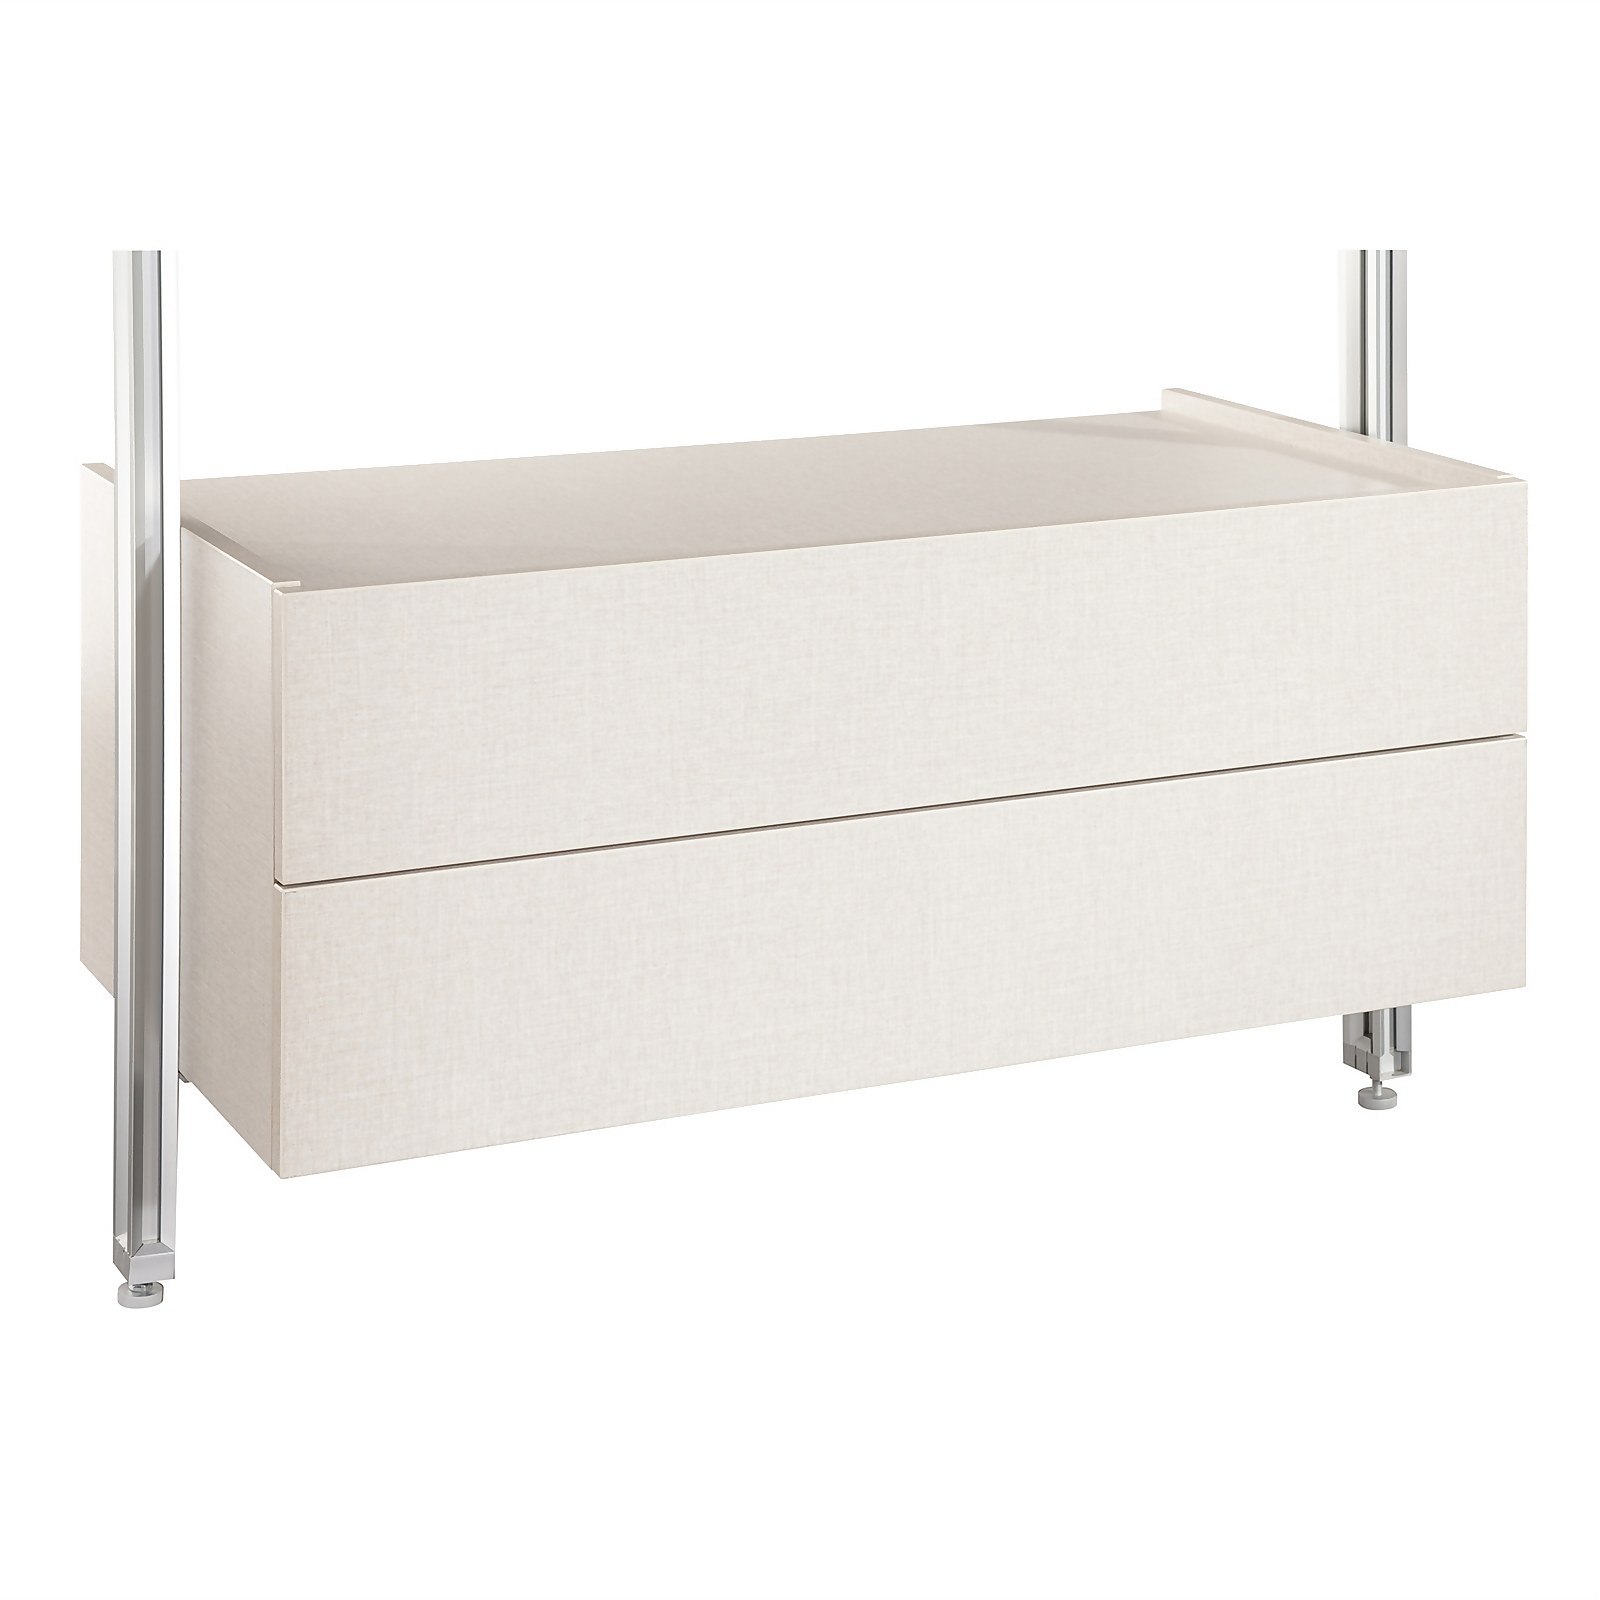 Photo of Relax Linen Double Drawer Box Kit -h-380mm X -w-900mm X -d-500mm